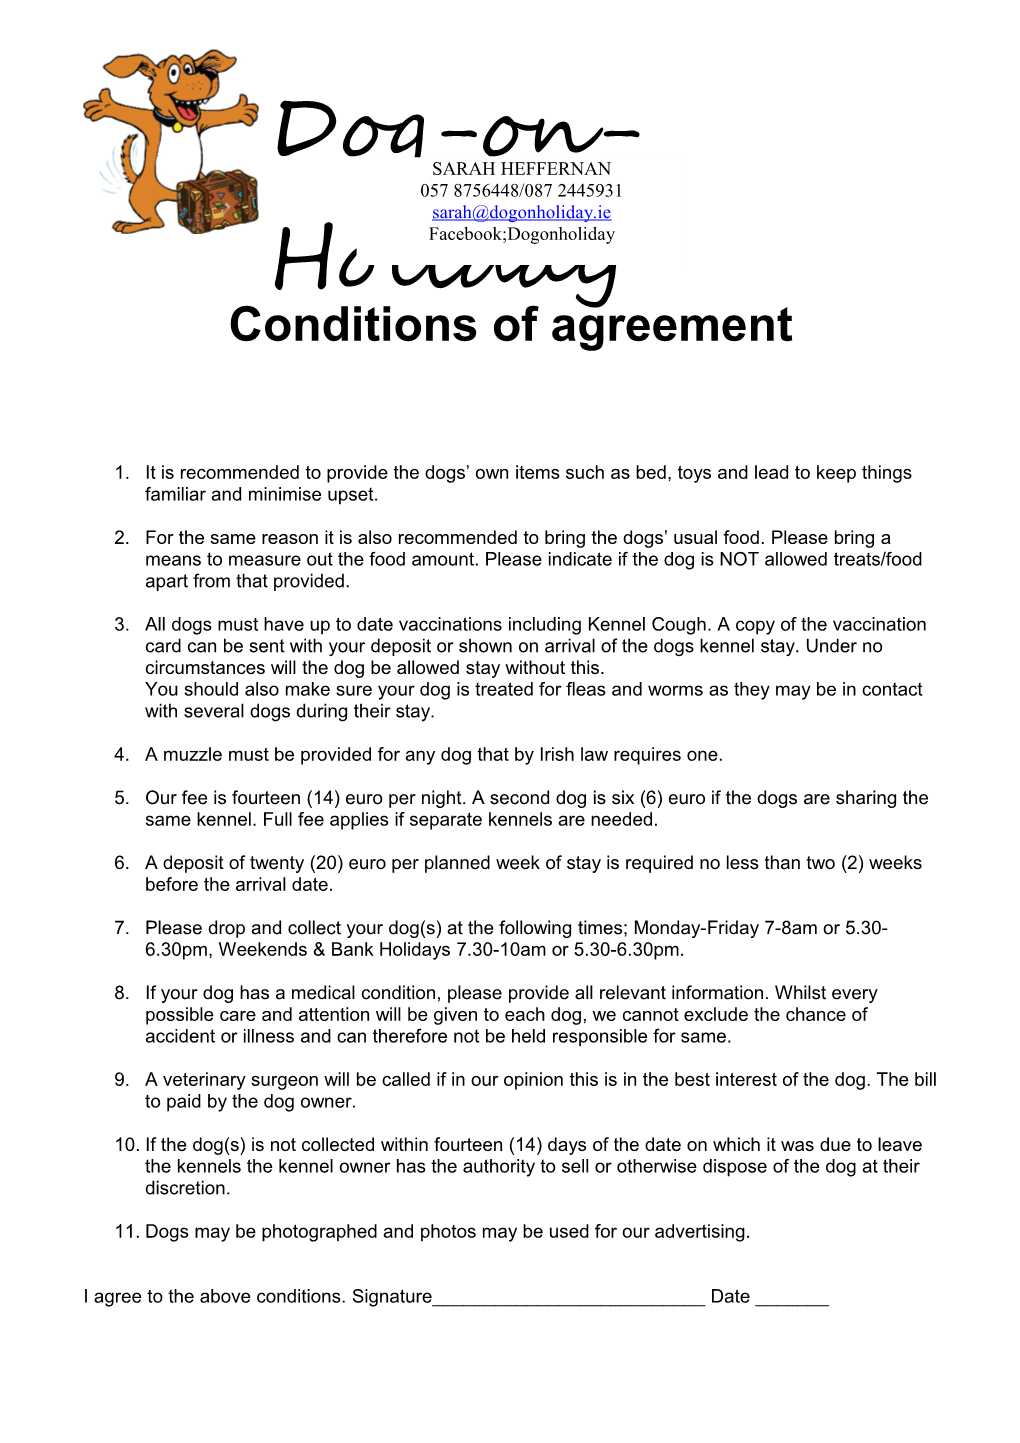 Conditions of Agreement